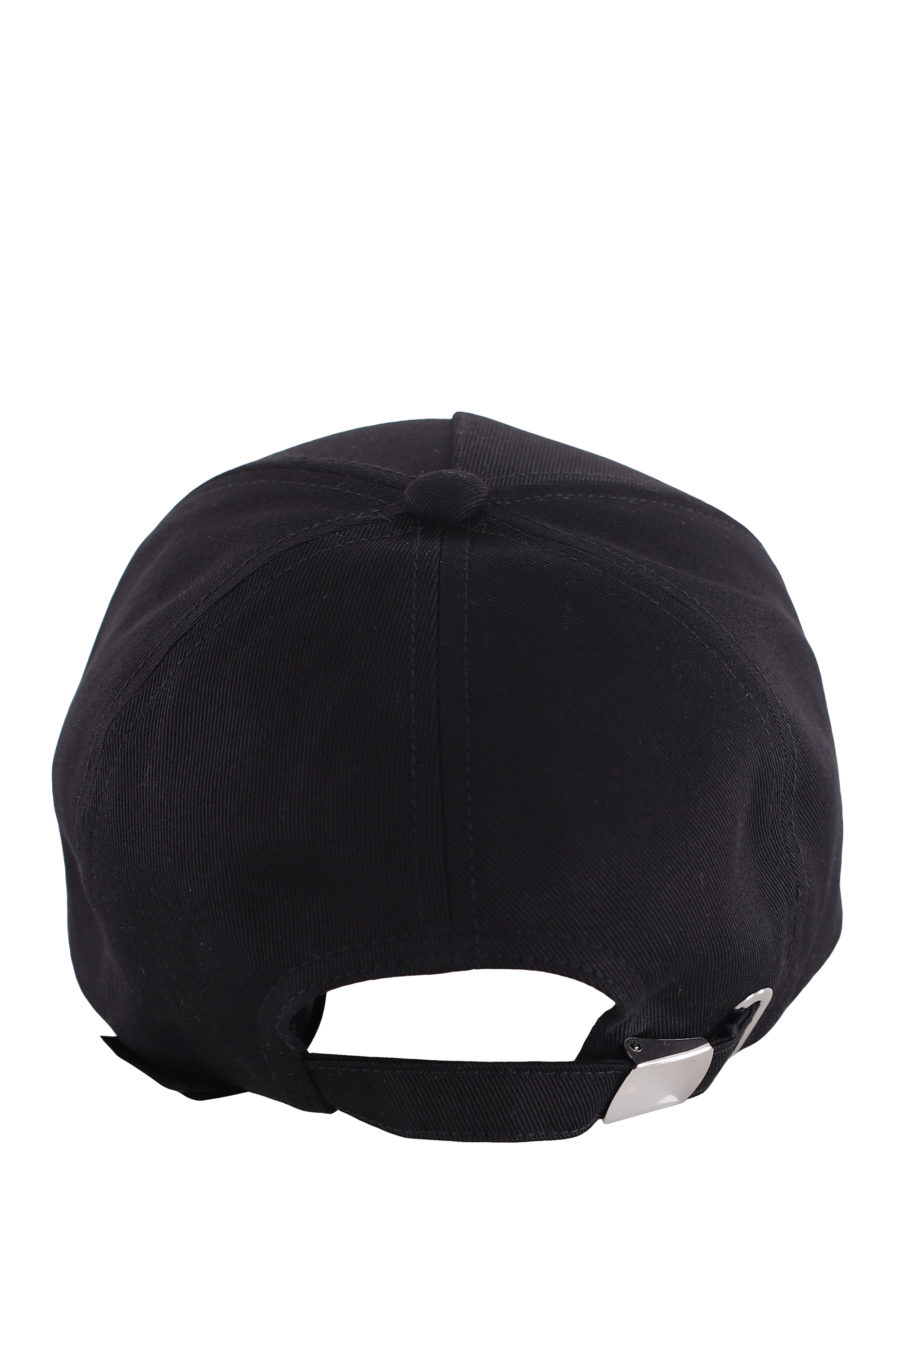 Black cap with embroidered logo - IMG 7260